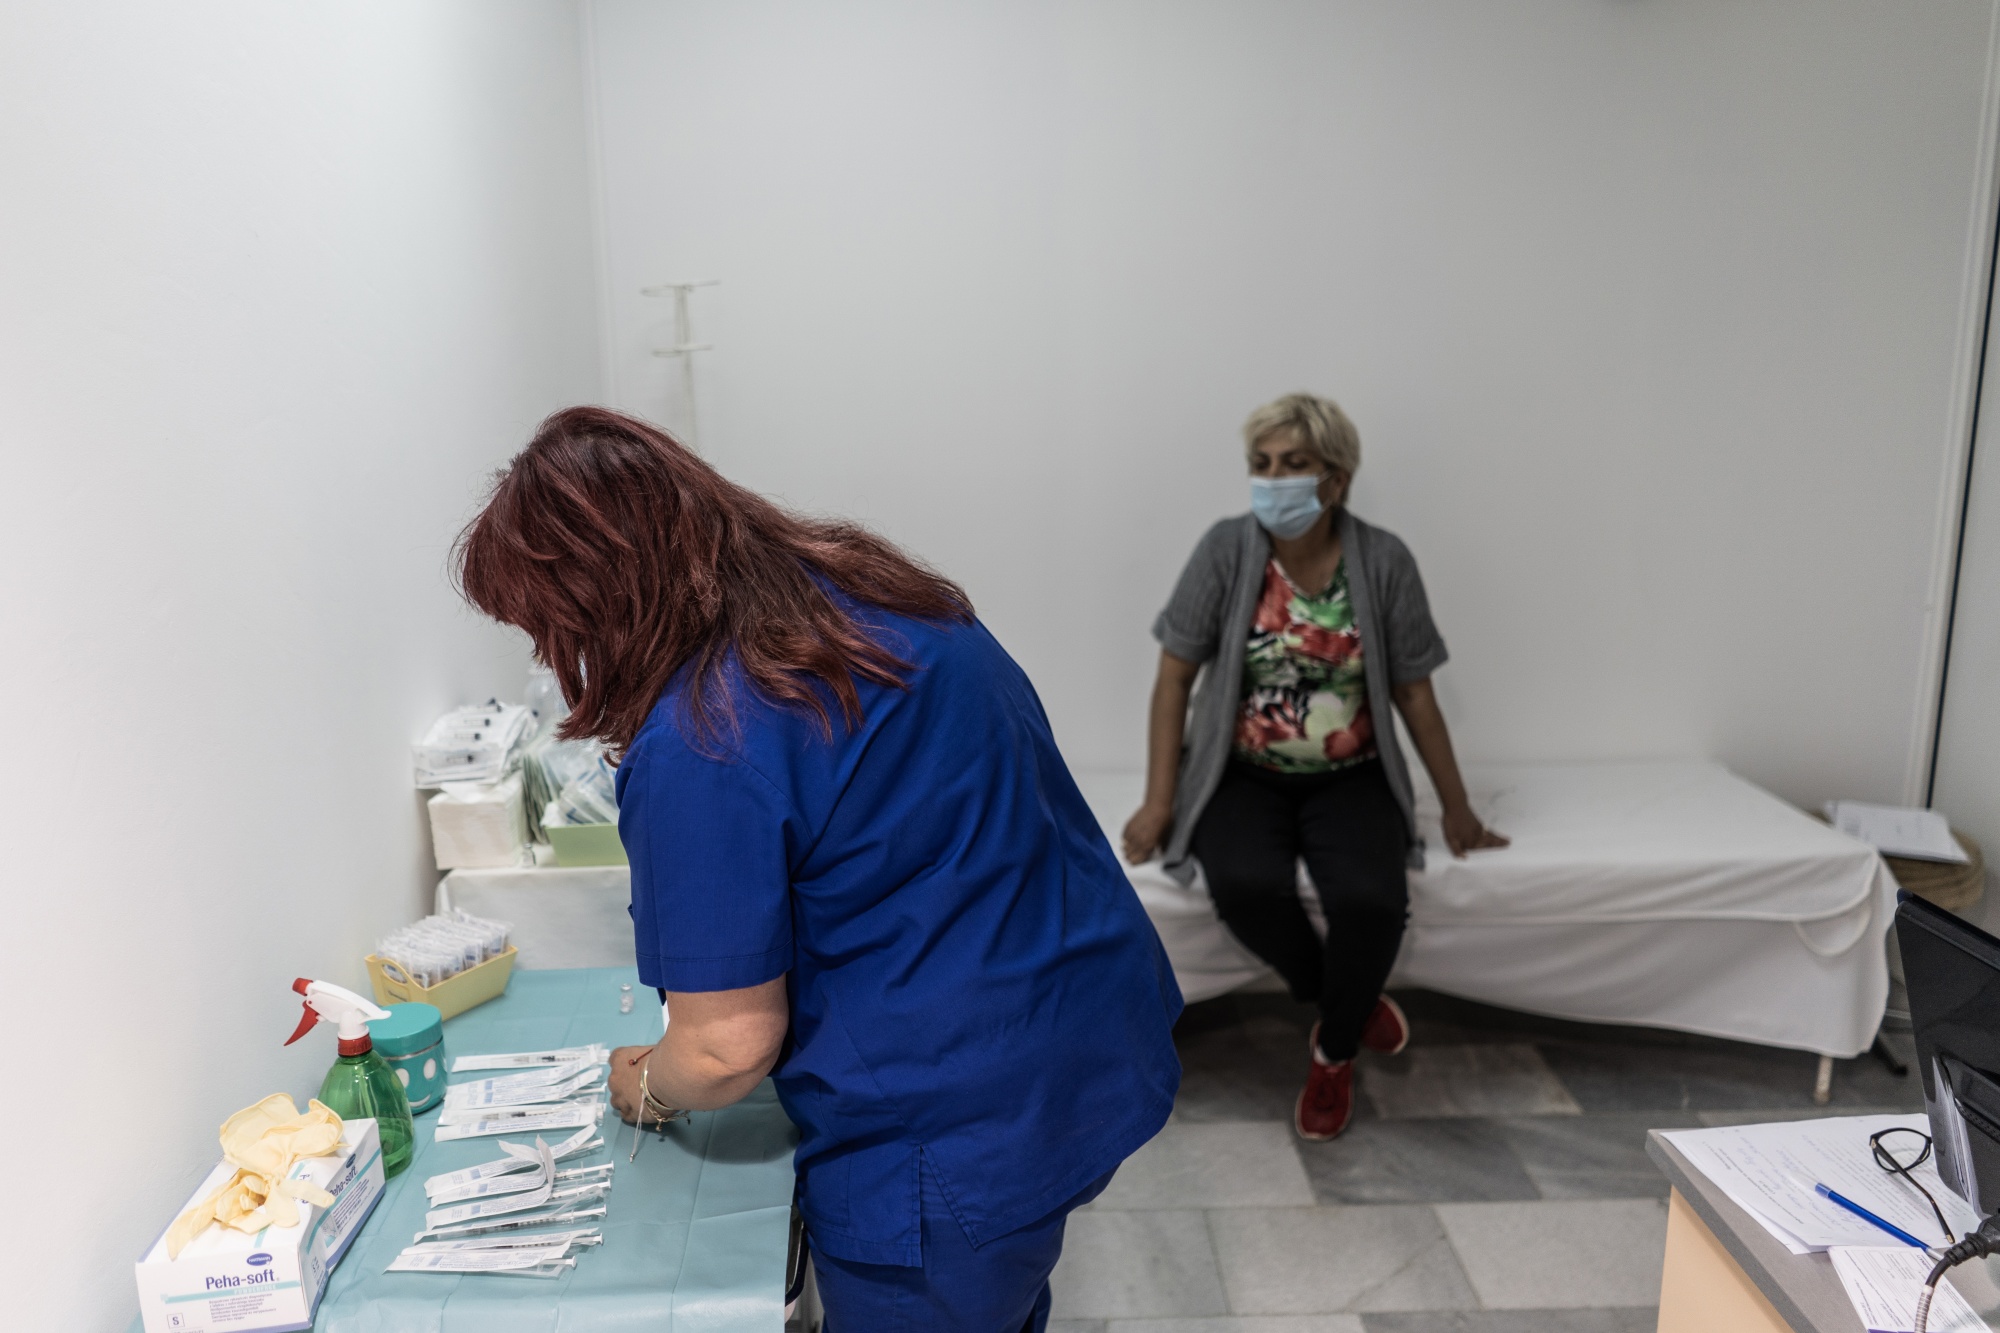 A medical worker prepares to administer a Covid-19 vaccine to an person in Albena, Bulgaria.